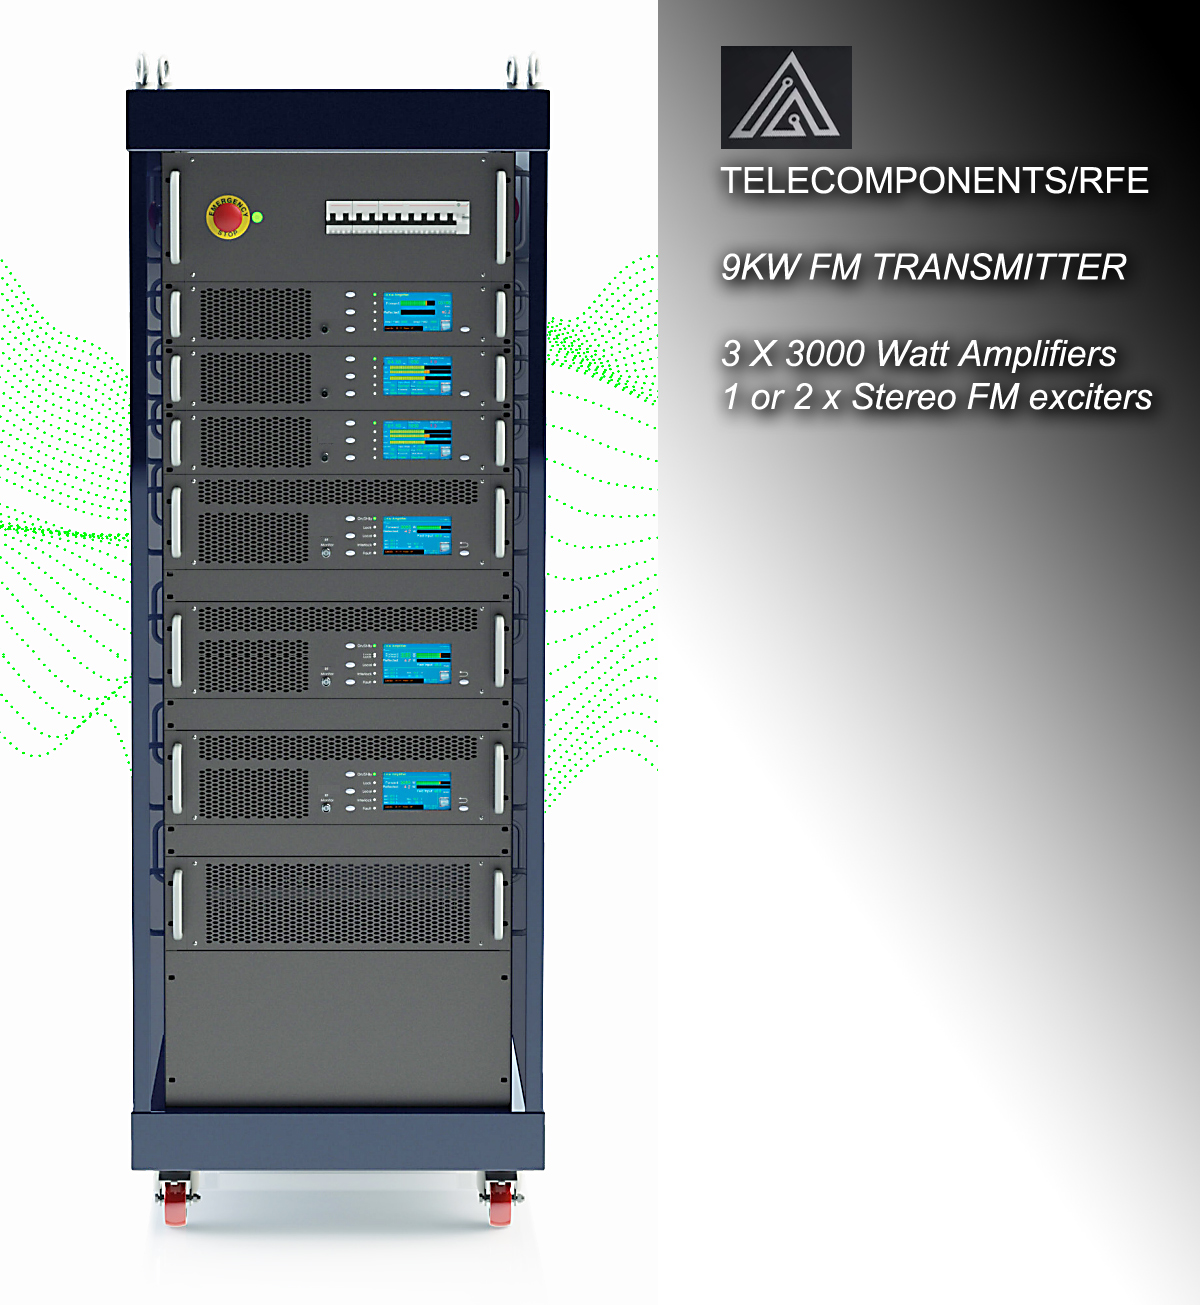 9 Kw TLDS/9000 FM Telecomponents transmitter